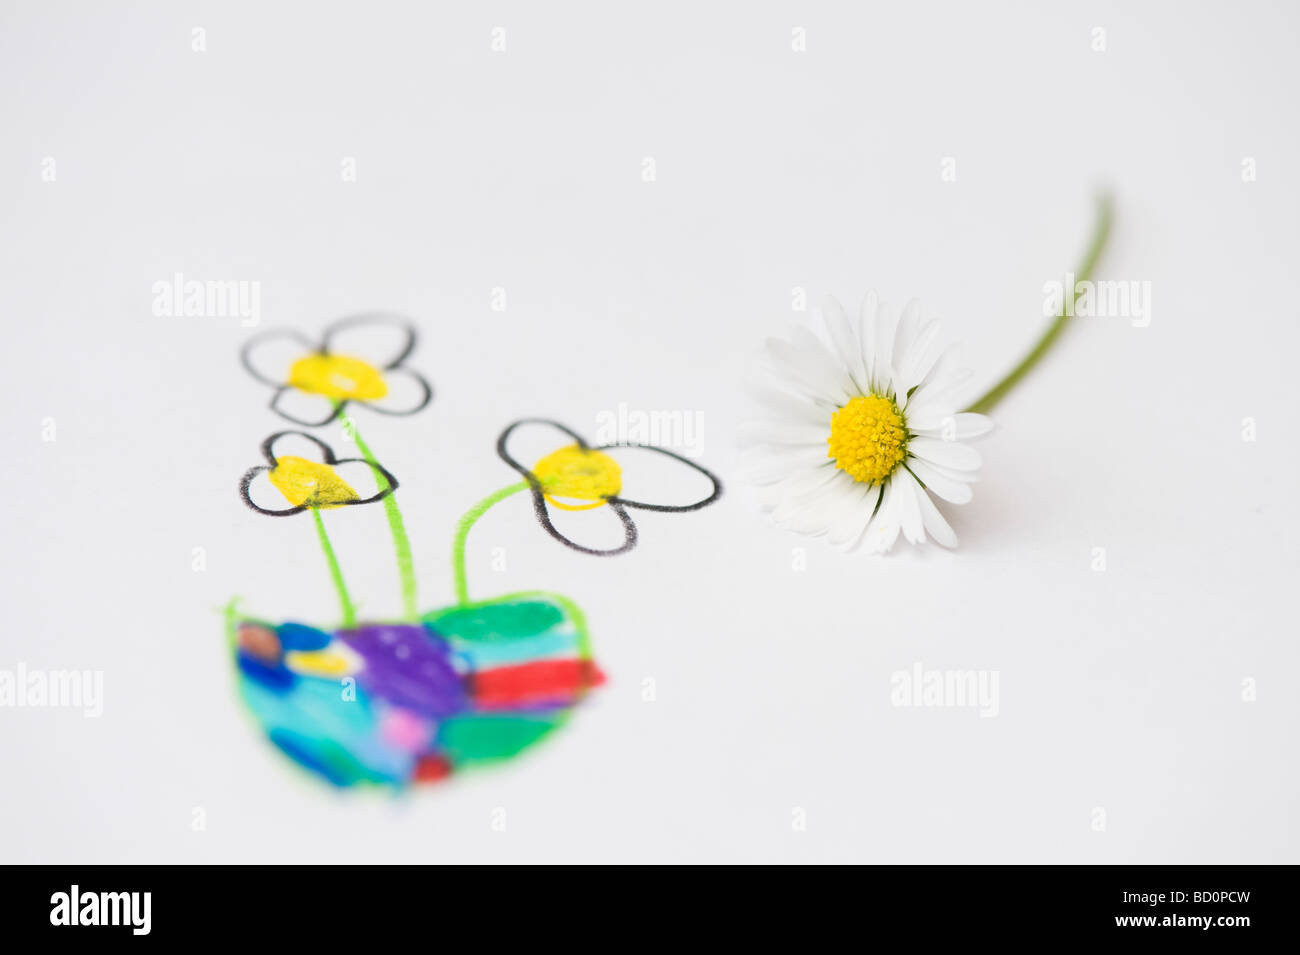 Daisy flowers with a child's drawing of flowers Stock Photo